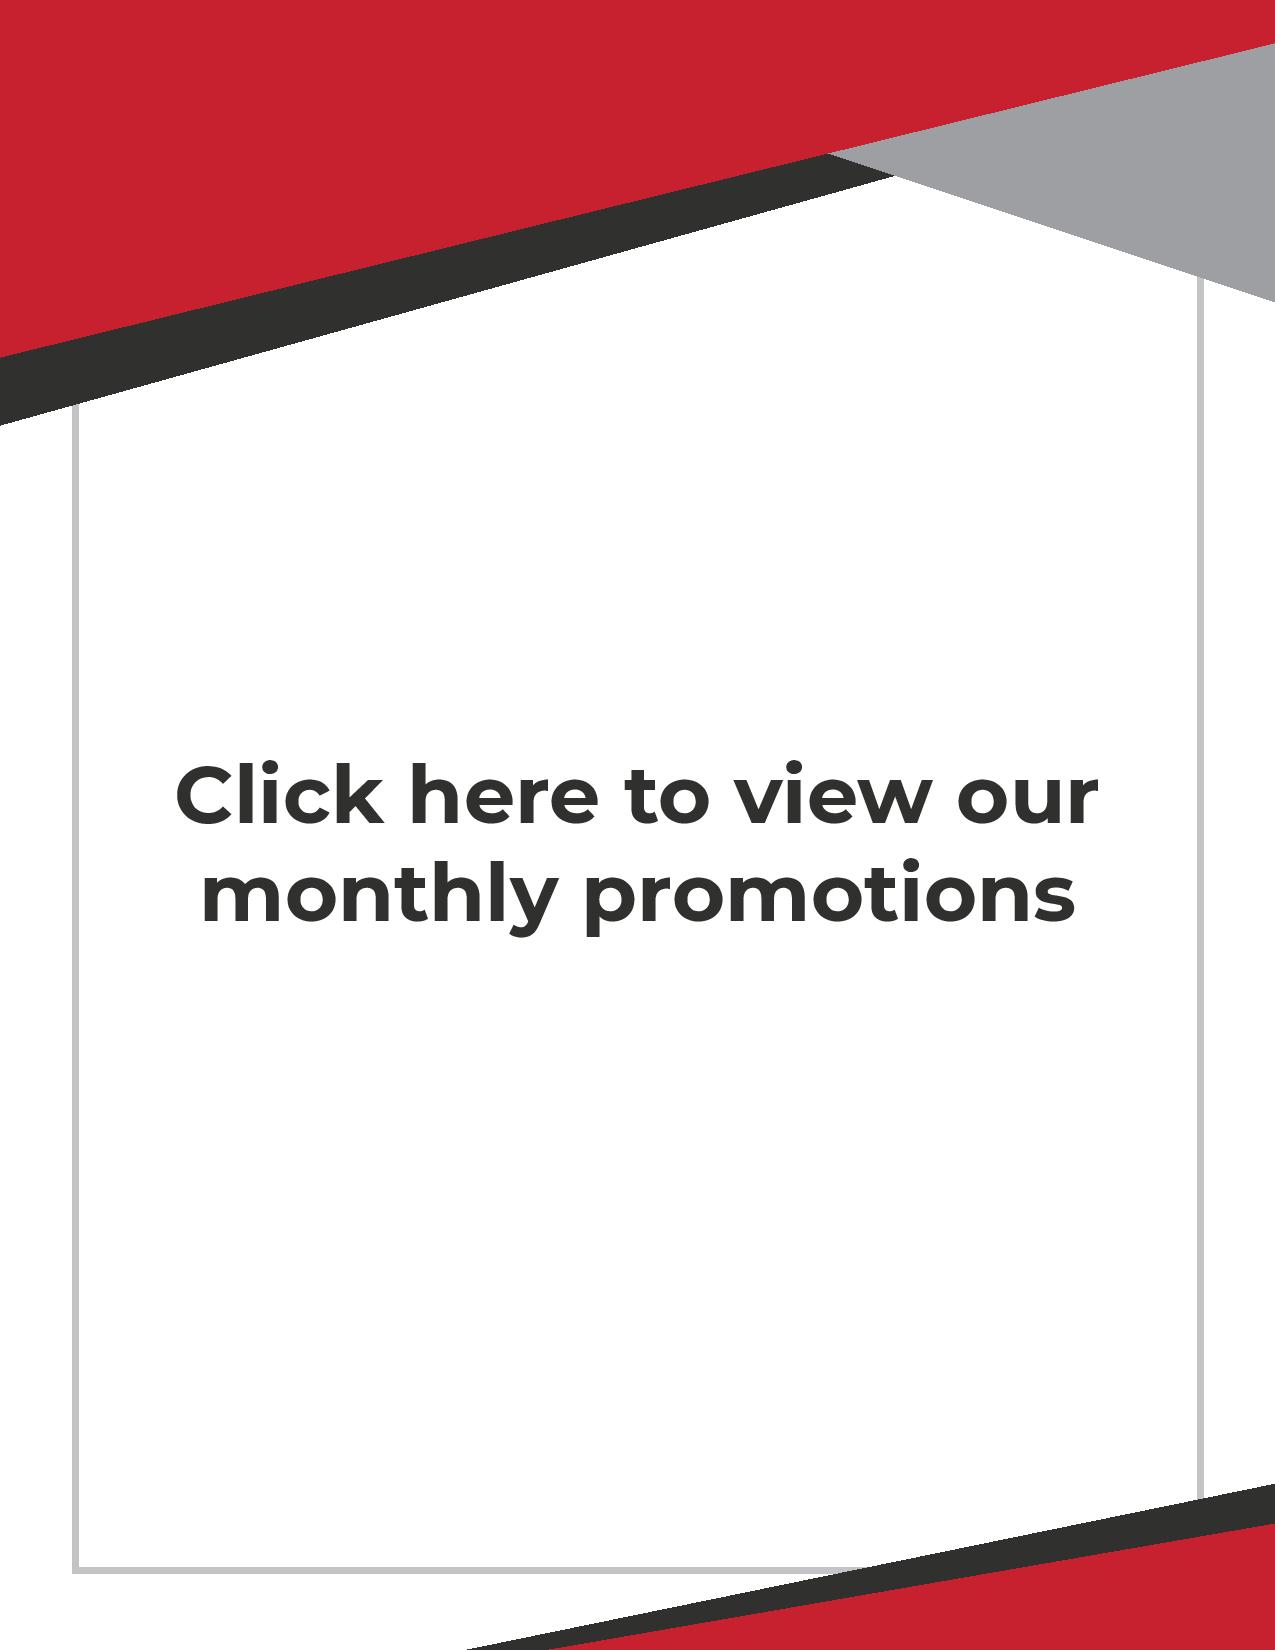 Check out these December monthly promotions image